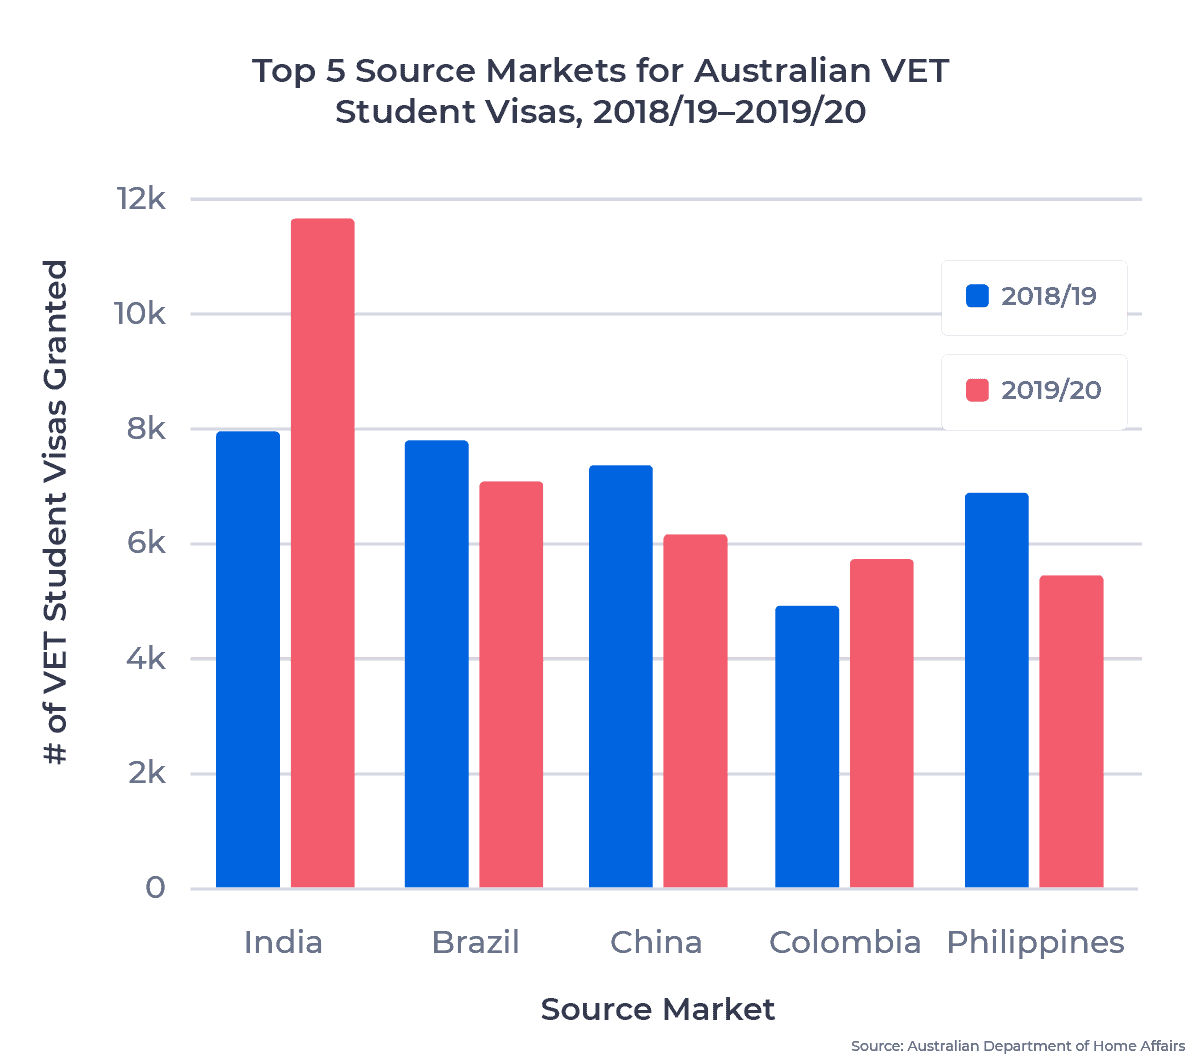 Double bar chart showing the top 5 source markets for Australian VET student visas in 2018/19 to 2019/20